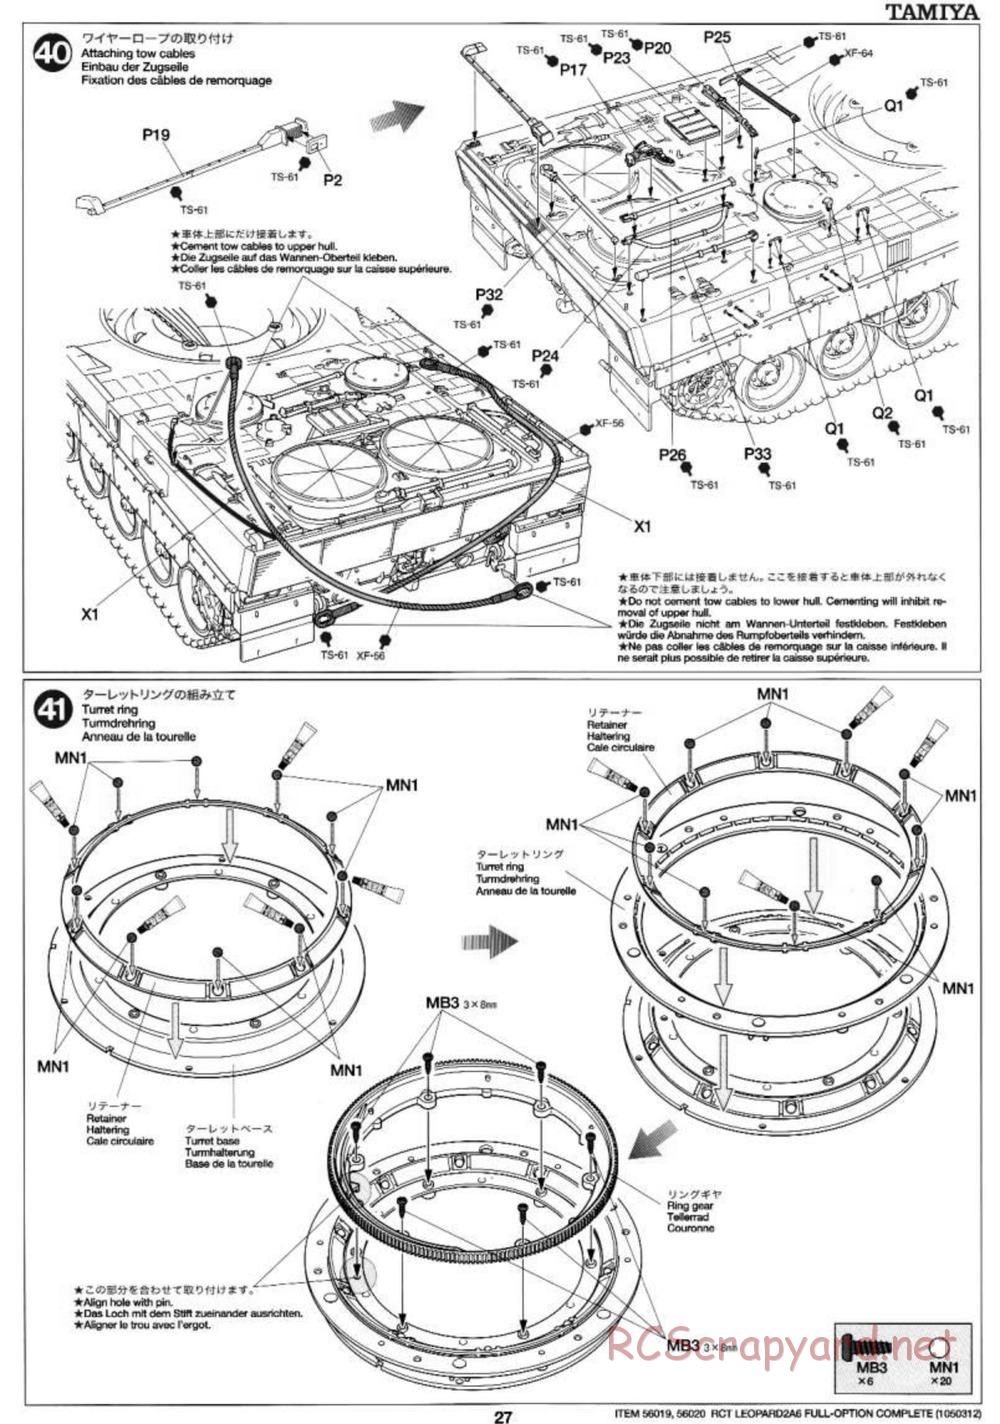 Tamiya - Leopard 2 A6 - 1/16 Scale Chassis - Manual - Page 27